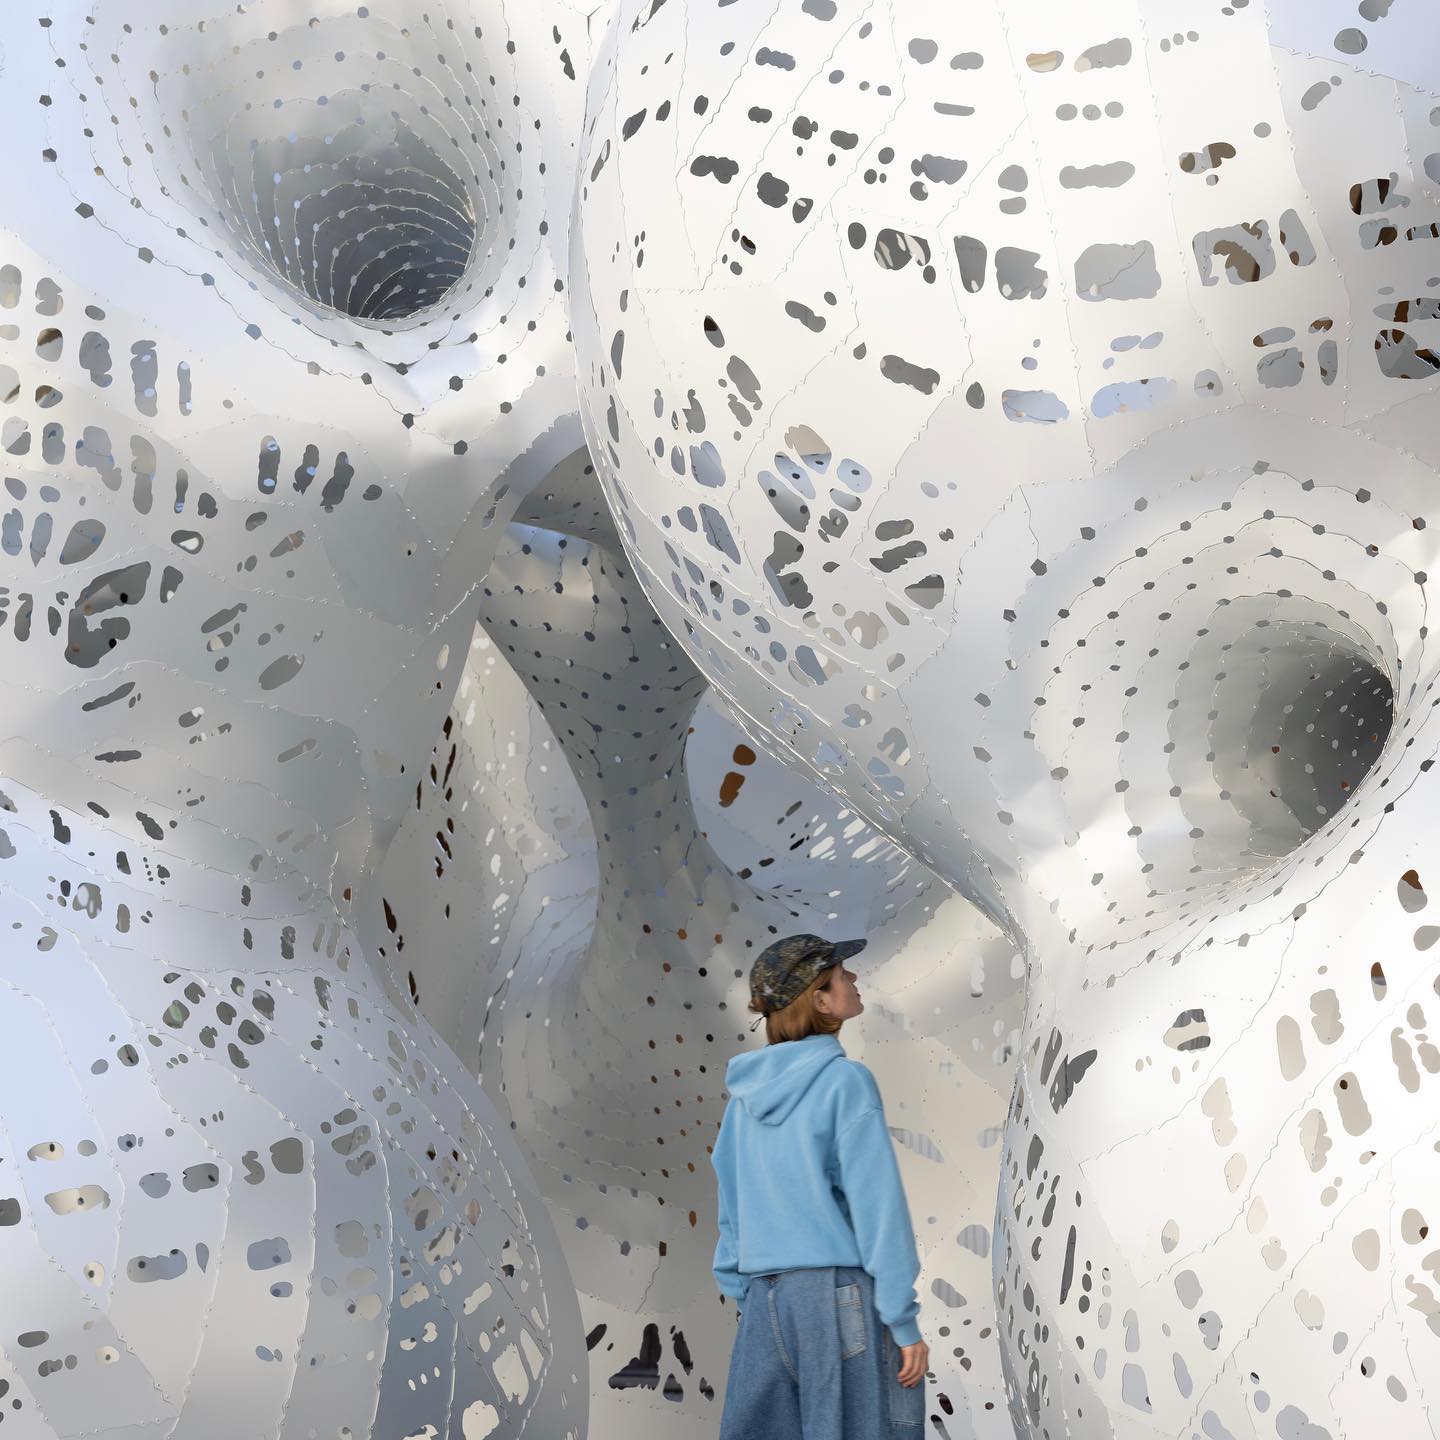 organic coral-like structure by architect Marc Fornes